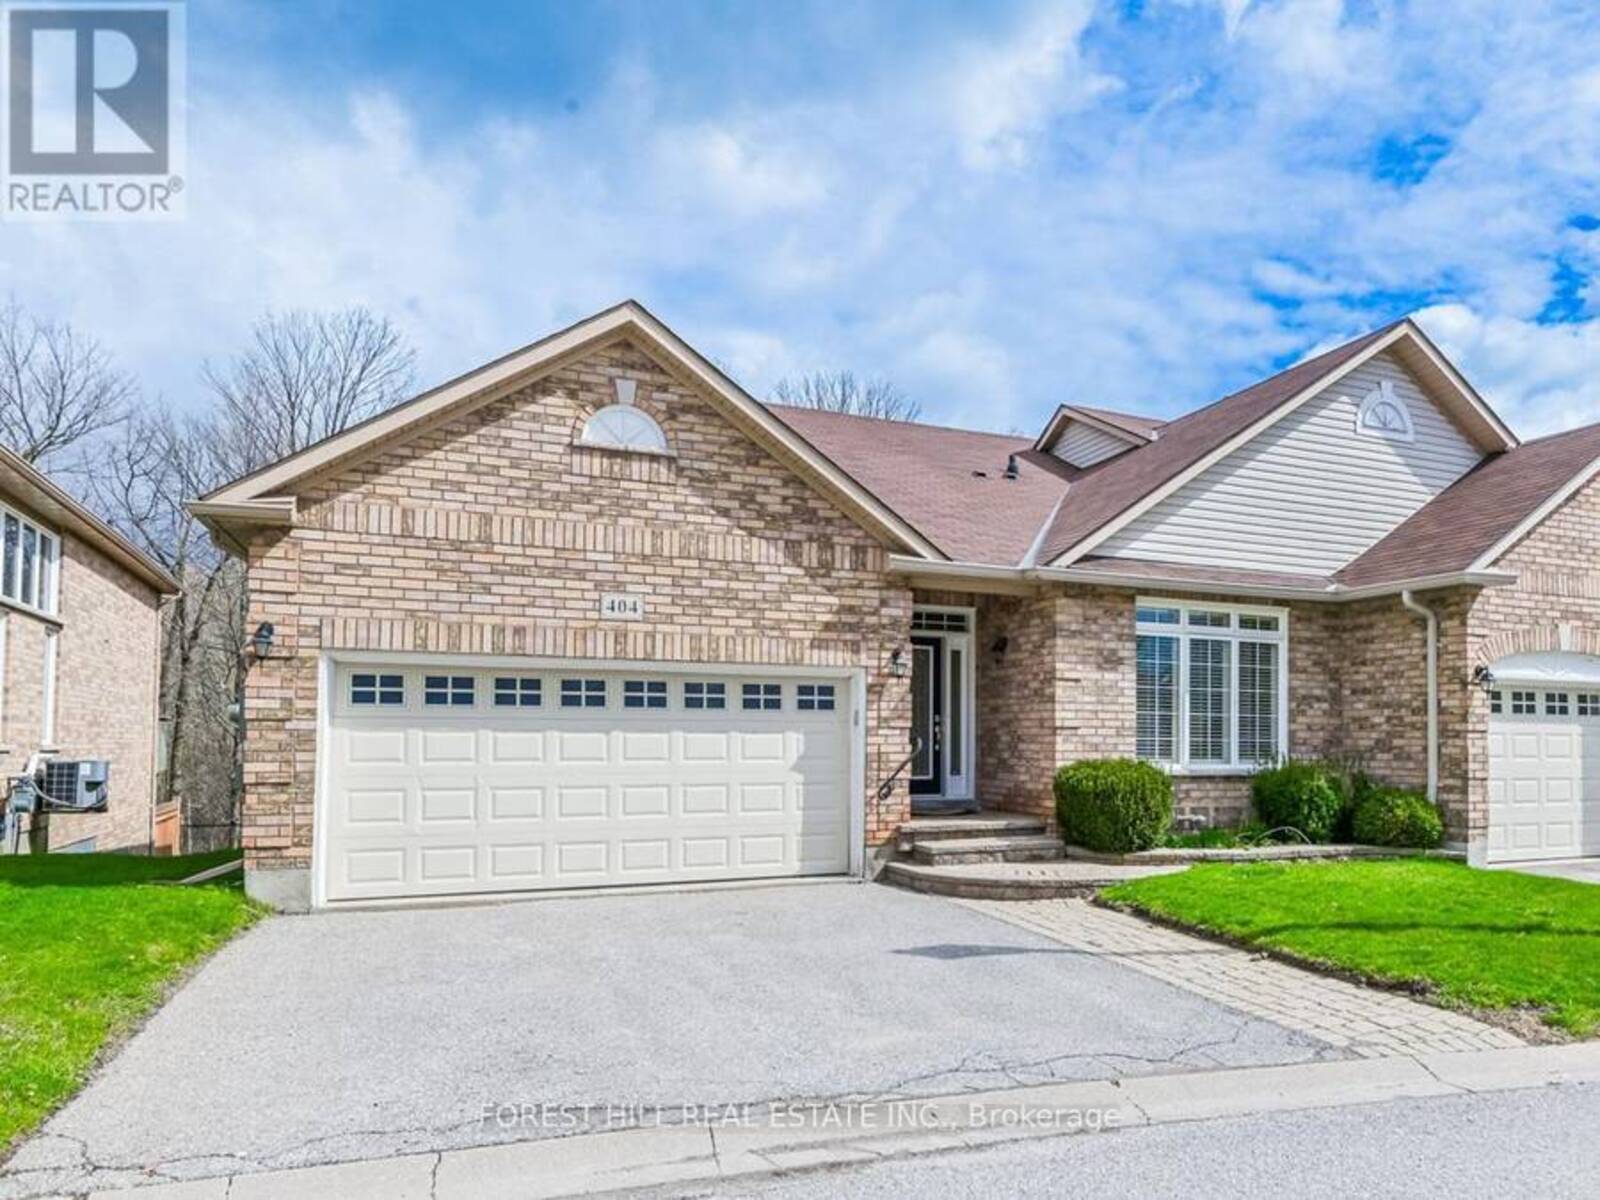 404 MORLEY COOK CRES, Newmarket, Ontario L3X 2M4